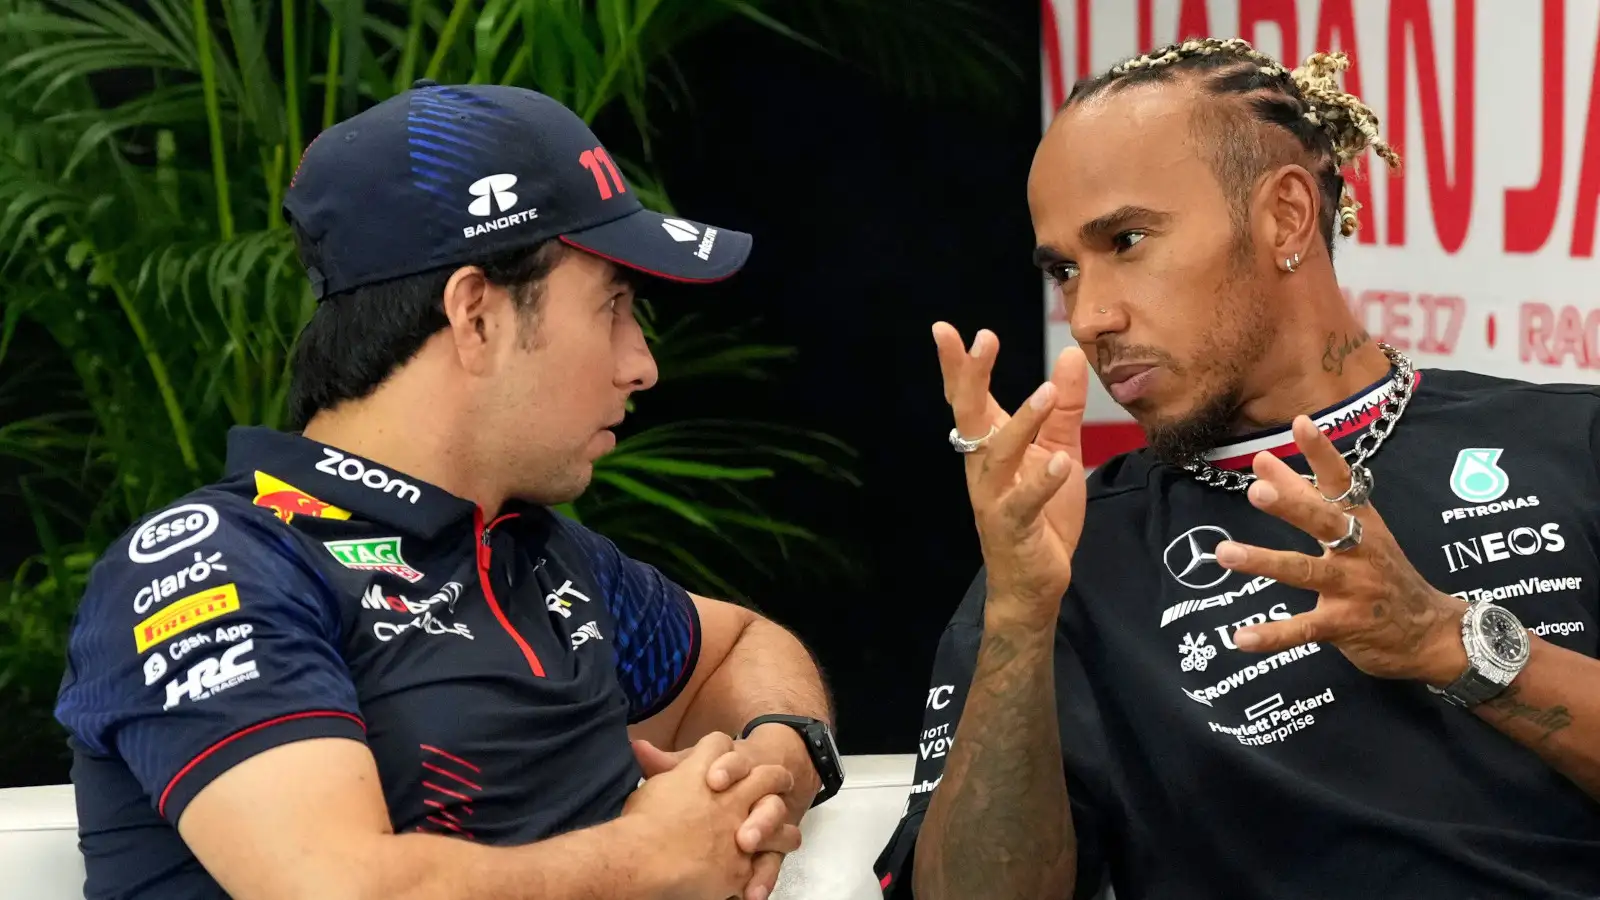 Red Bull driver Sergio Perez chatting with Lewis Hamilton during a press conference.